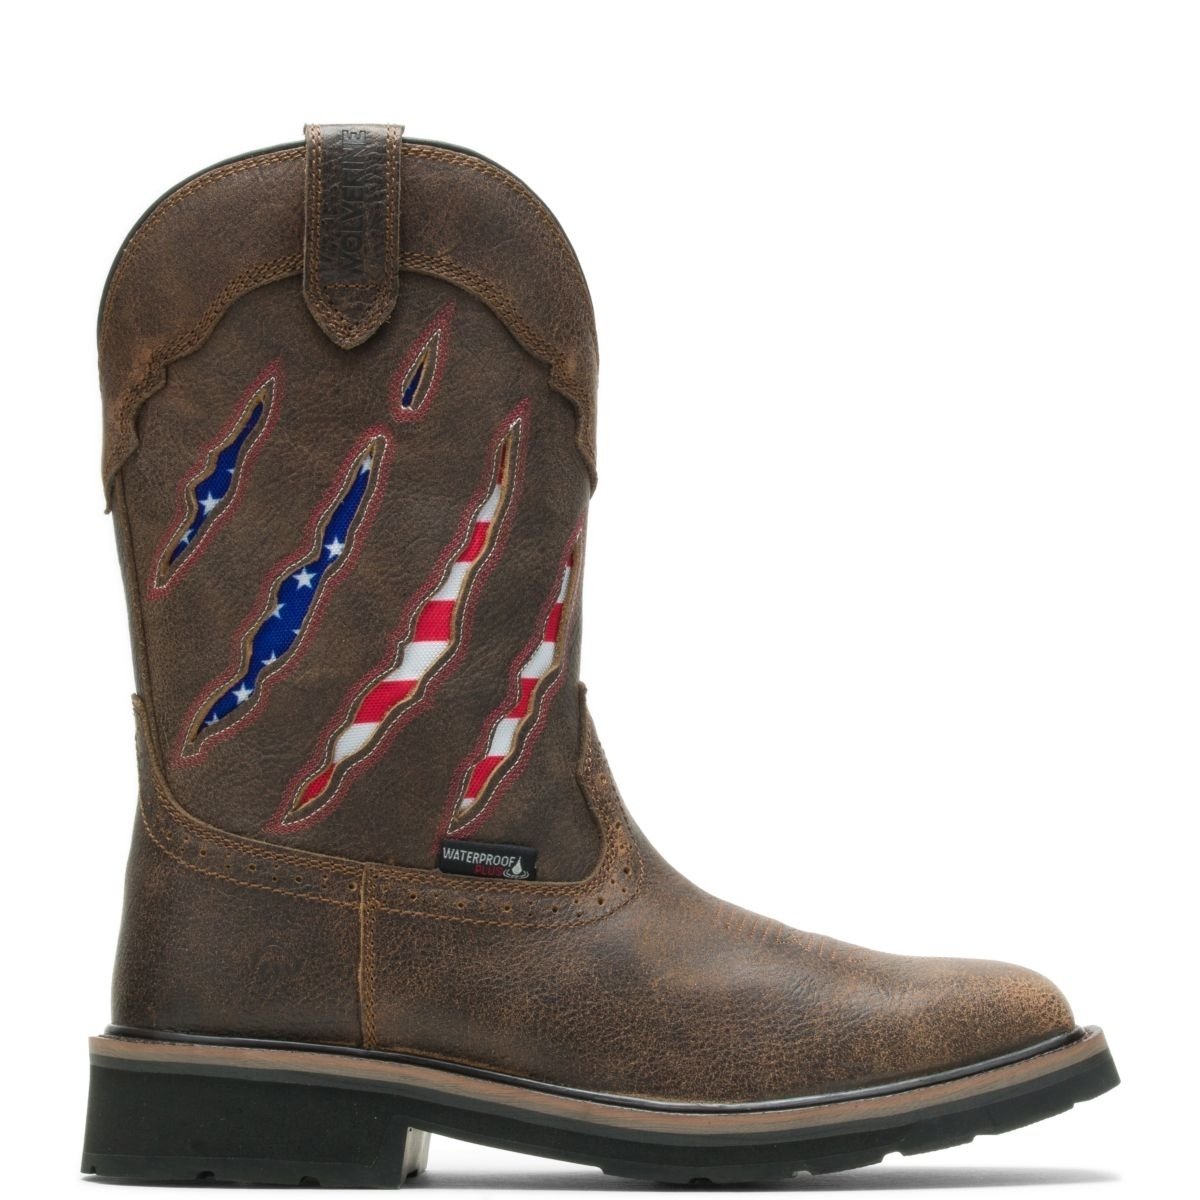 WOLVERINE Men's Rancher Claw Wellington Soft Toe Work Boot Brown/Flag - W200138 Flag/brown - Flag/brown, 10